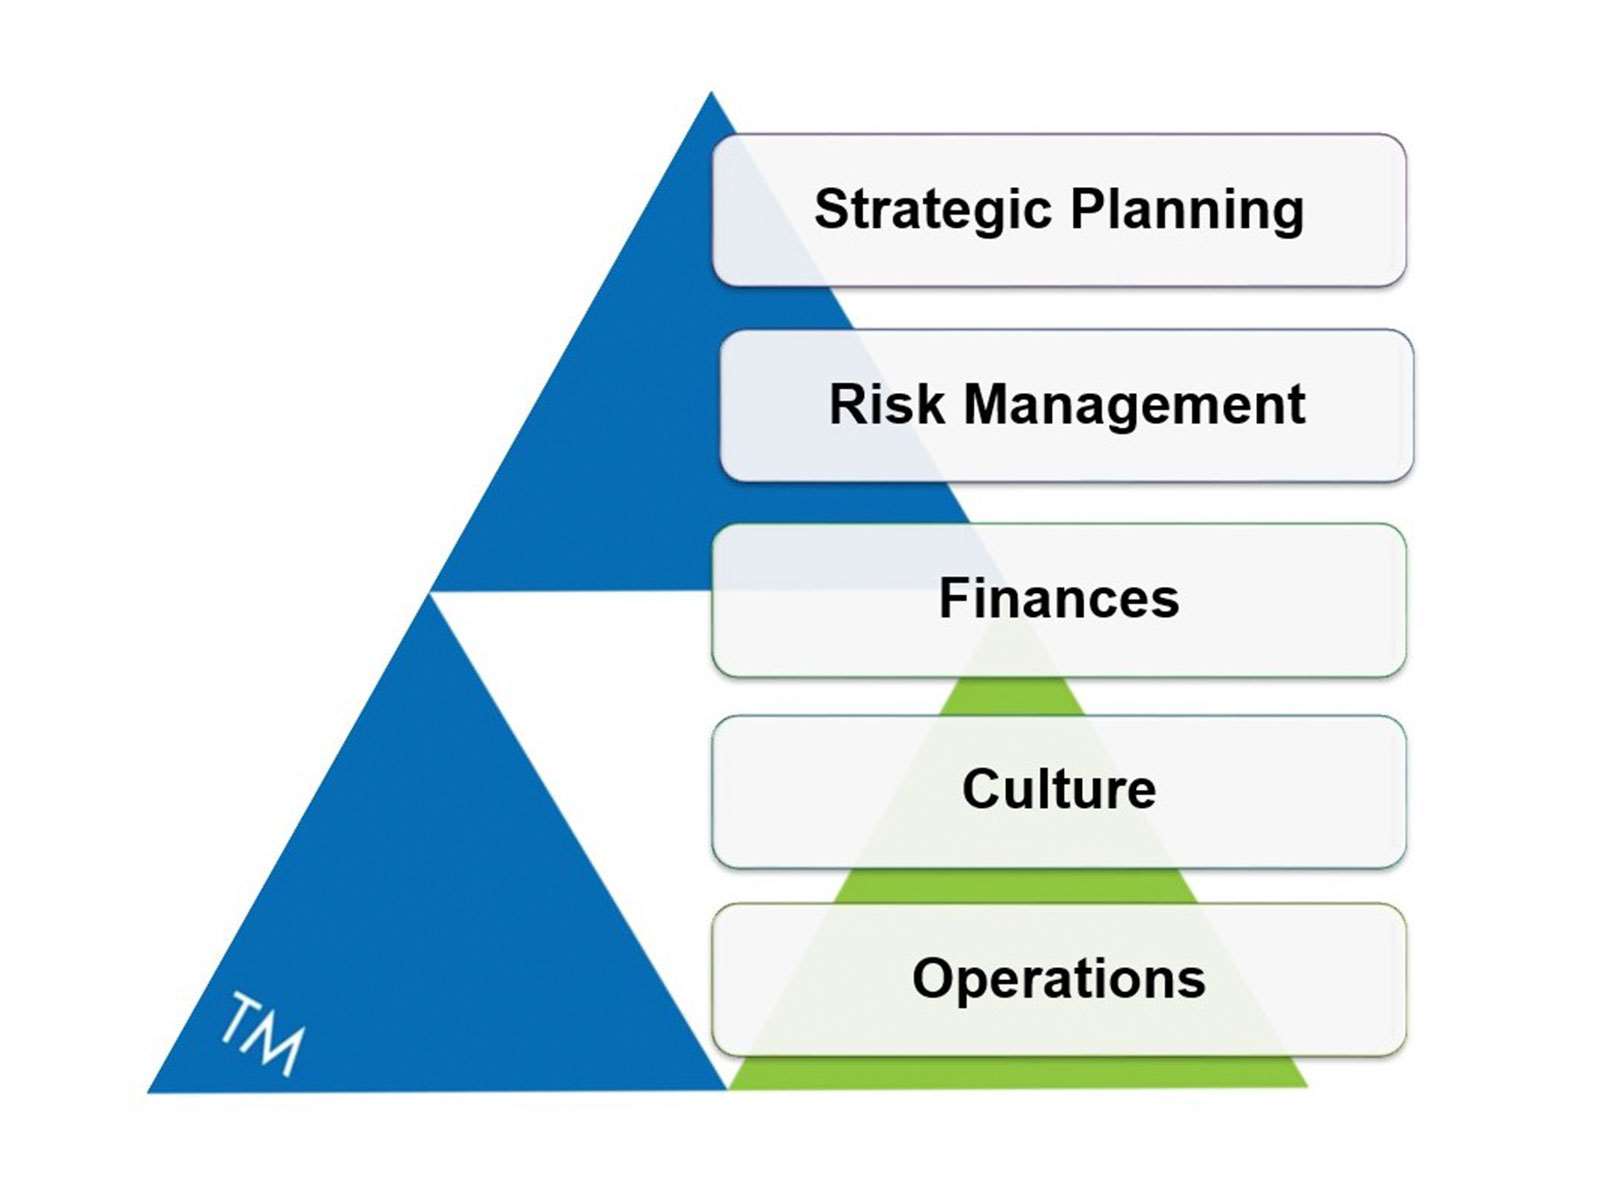 A graphic with a triangle made up of smaller triangles with "Strategic Planning," "Risk Management," "Finances," "Culture," and "Operations" in text.